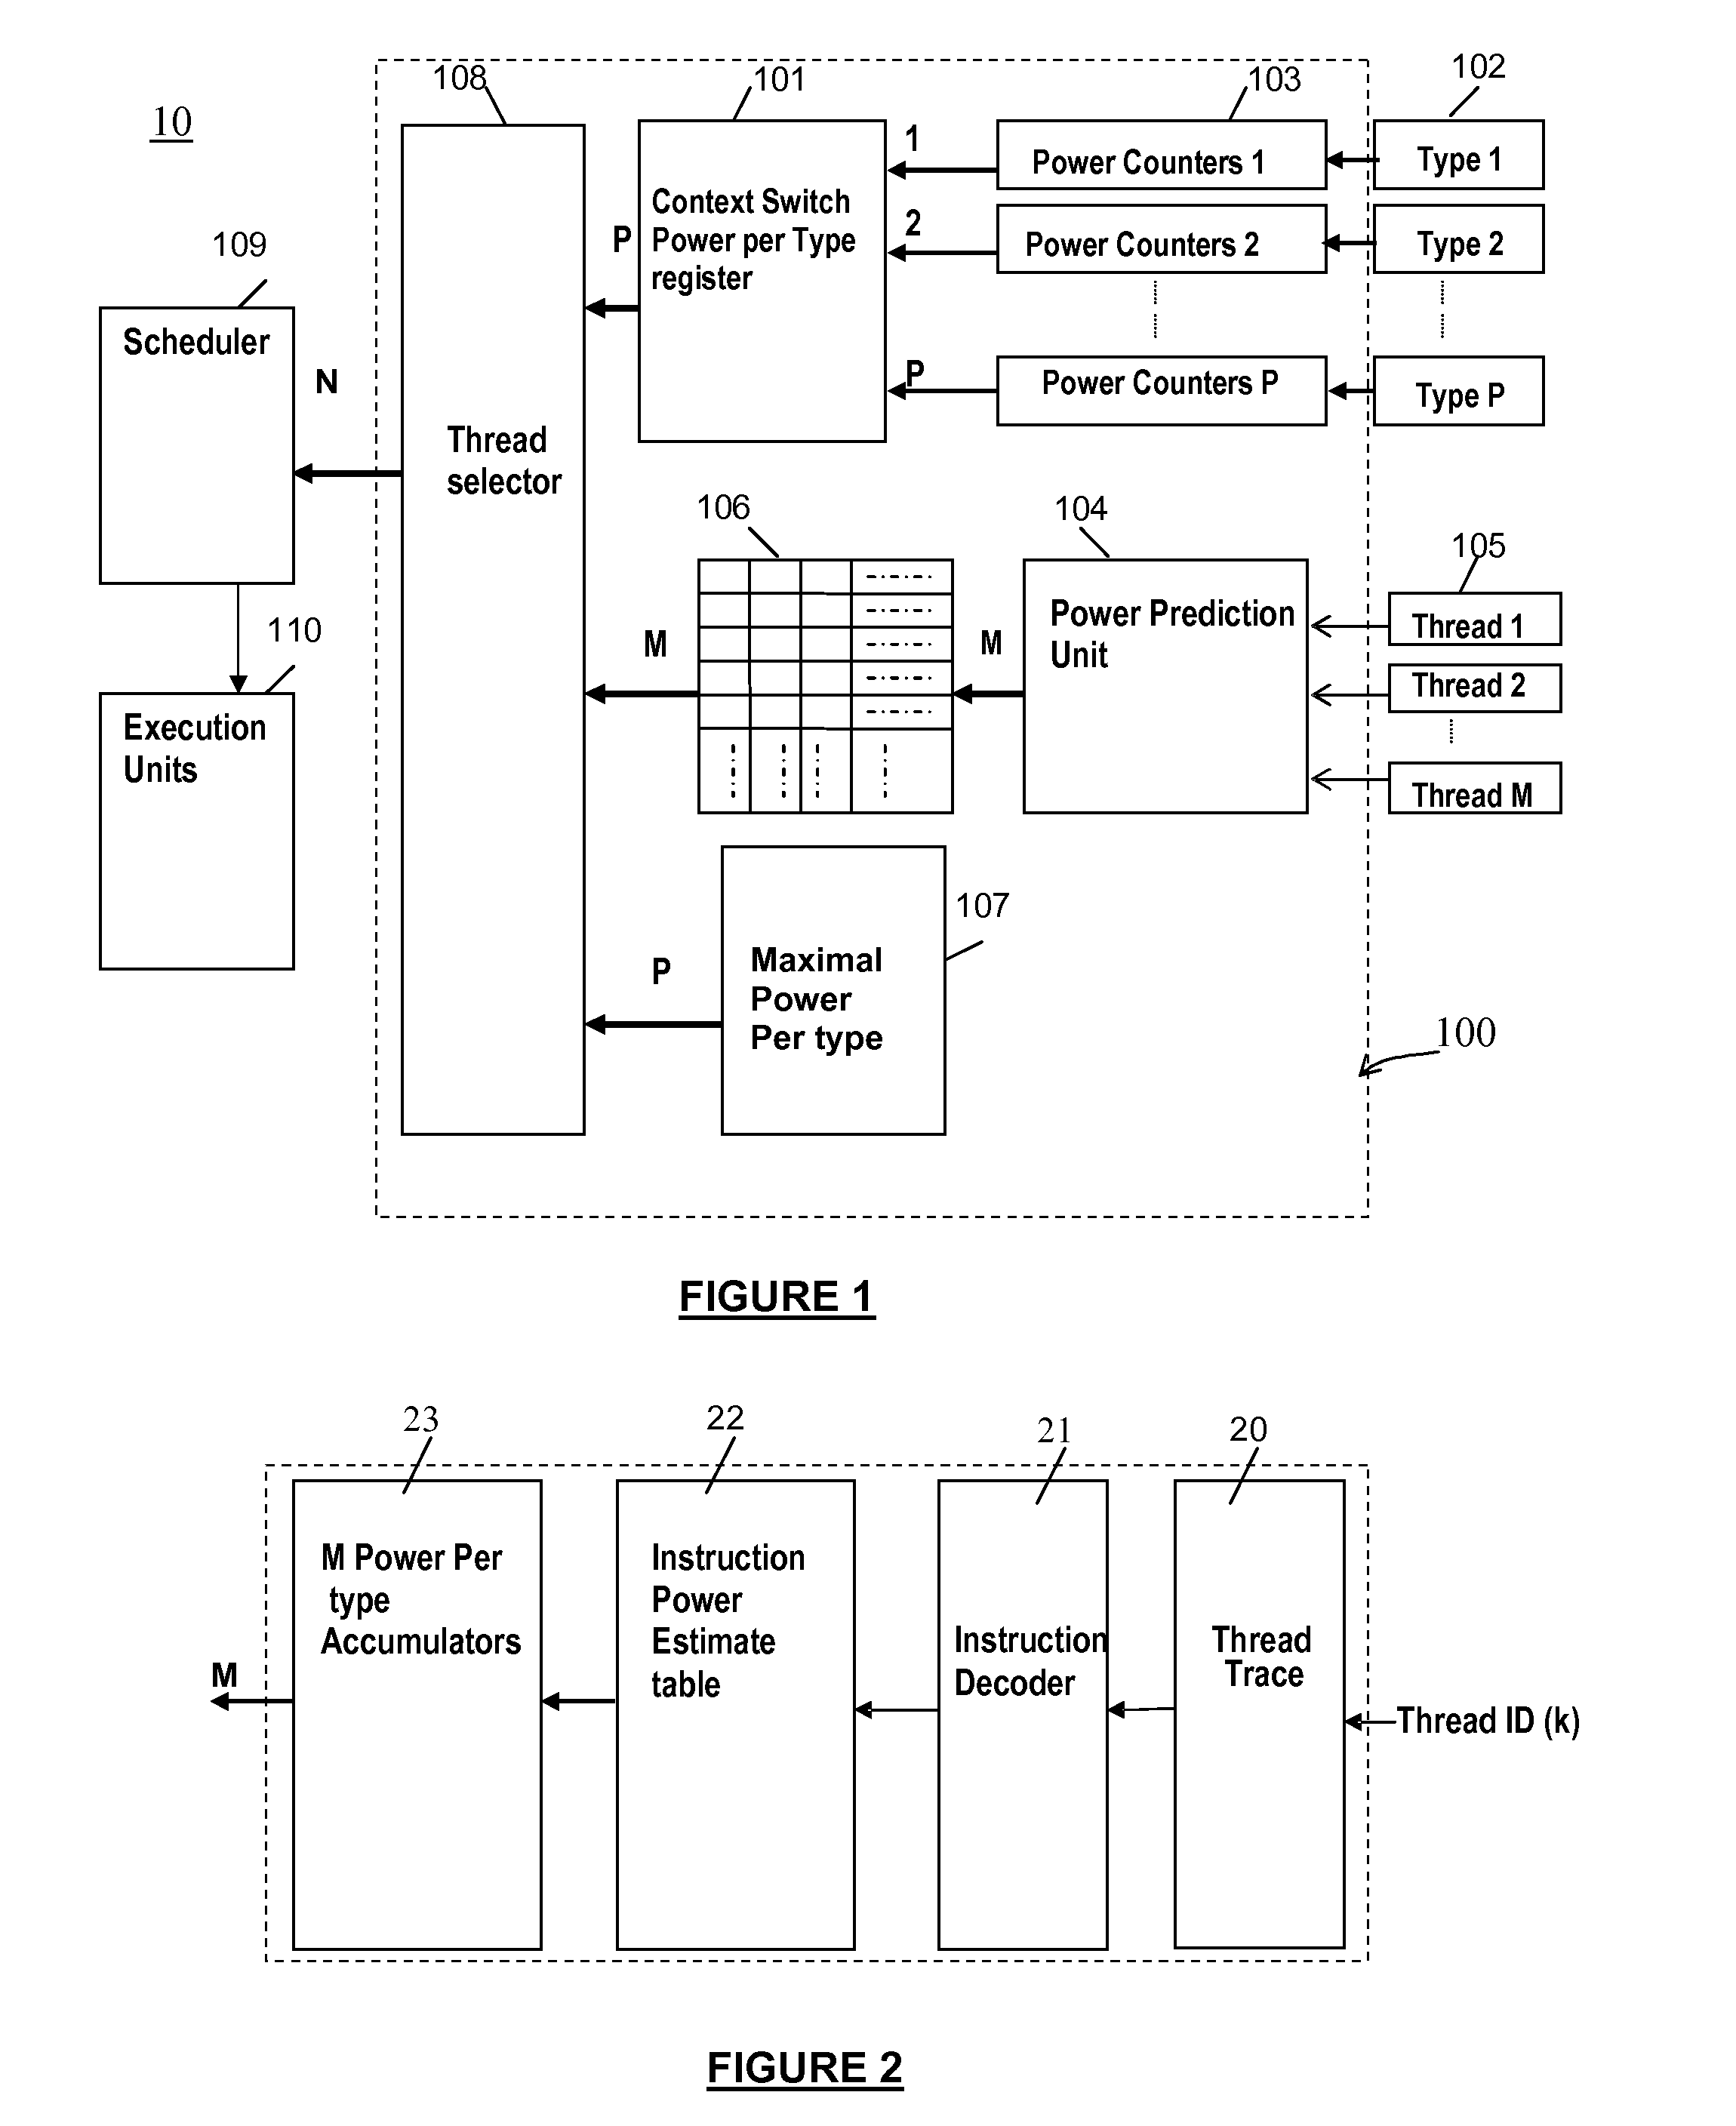 Scheduling threads in a processor based on instruction type power consumption